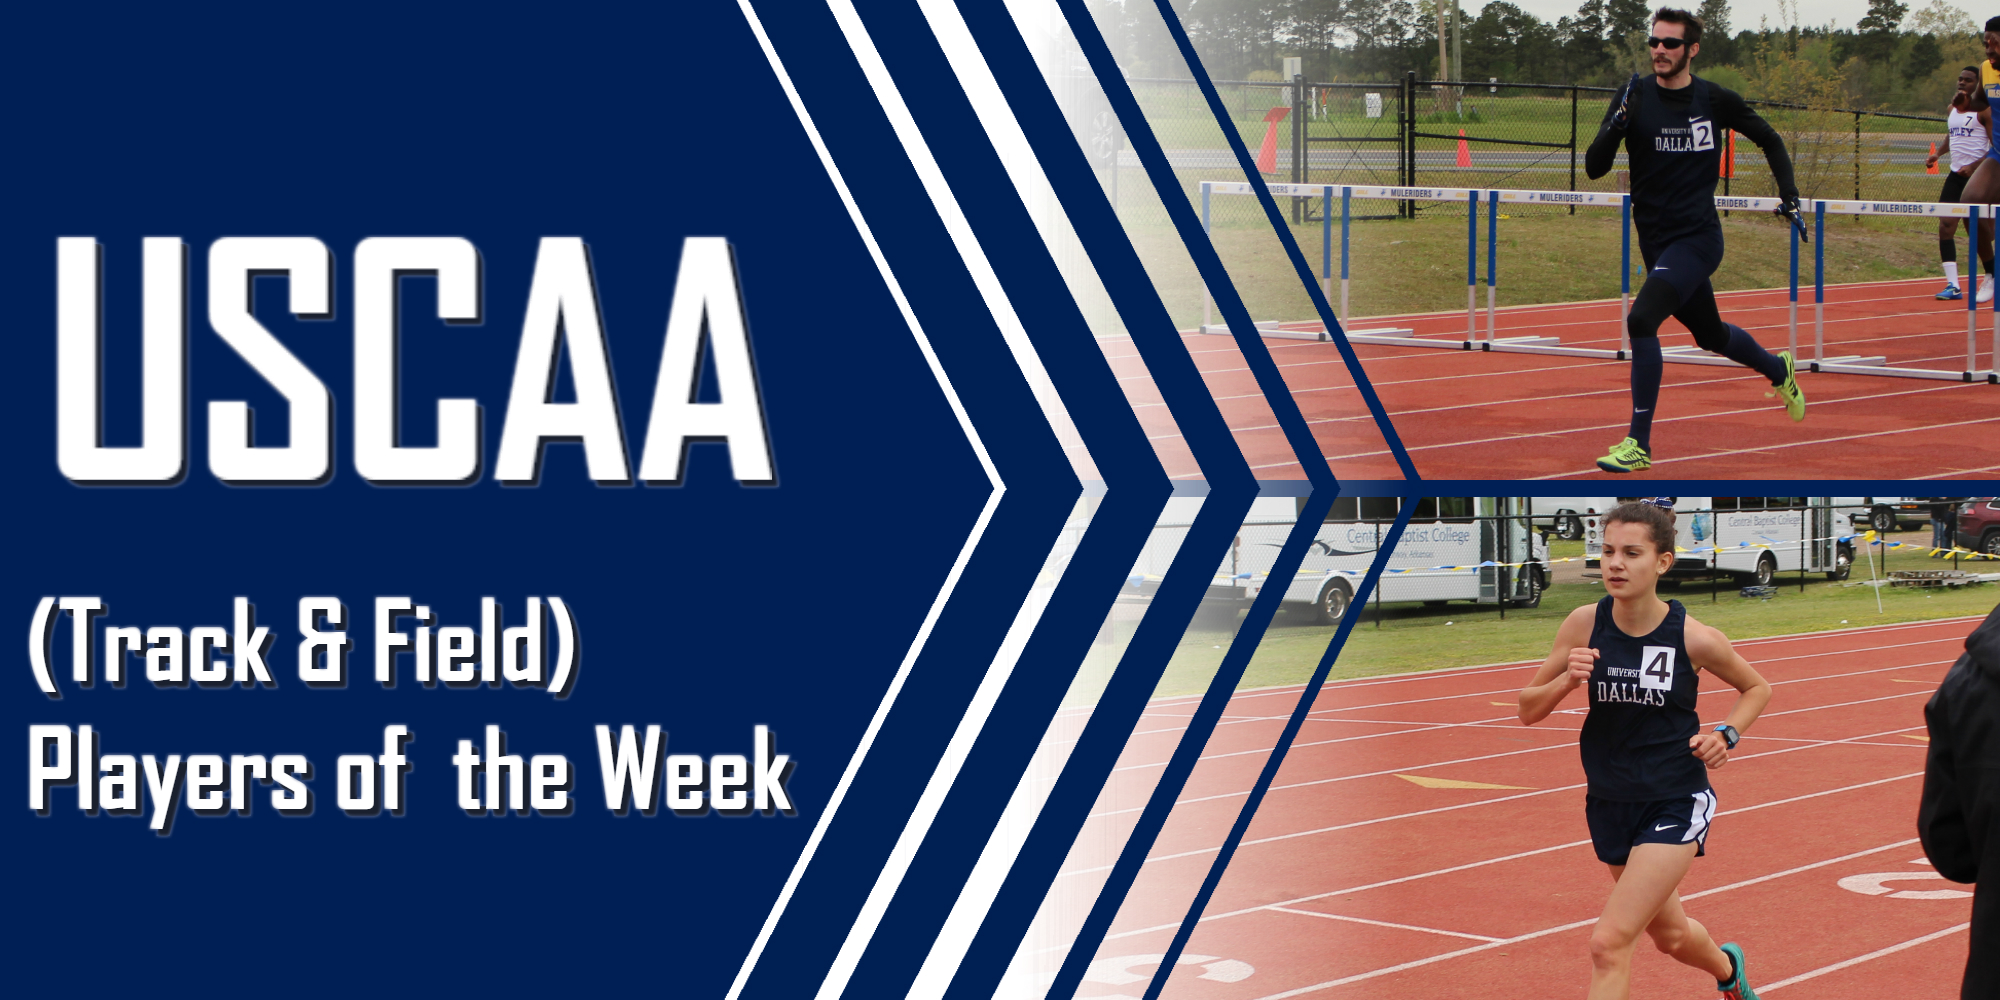 USCAA Track & Field Player of the Week Honors Return to McGuirk & Wilgenbusch